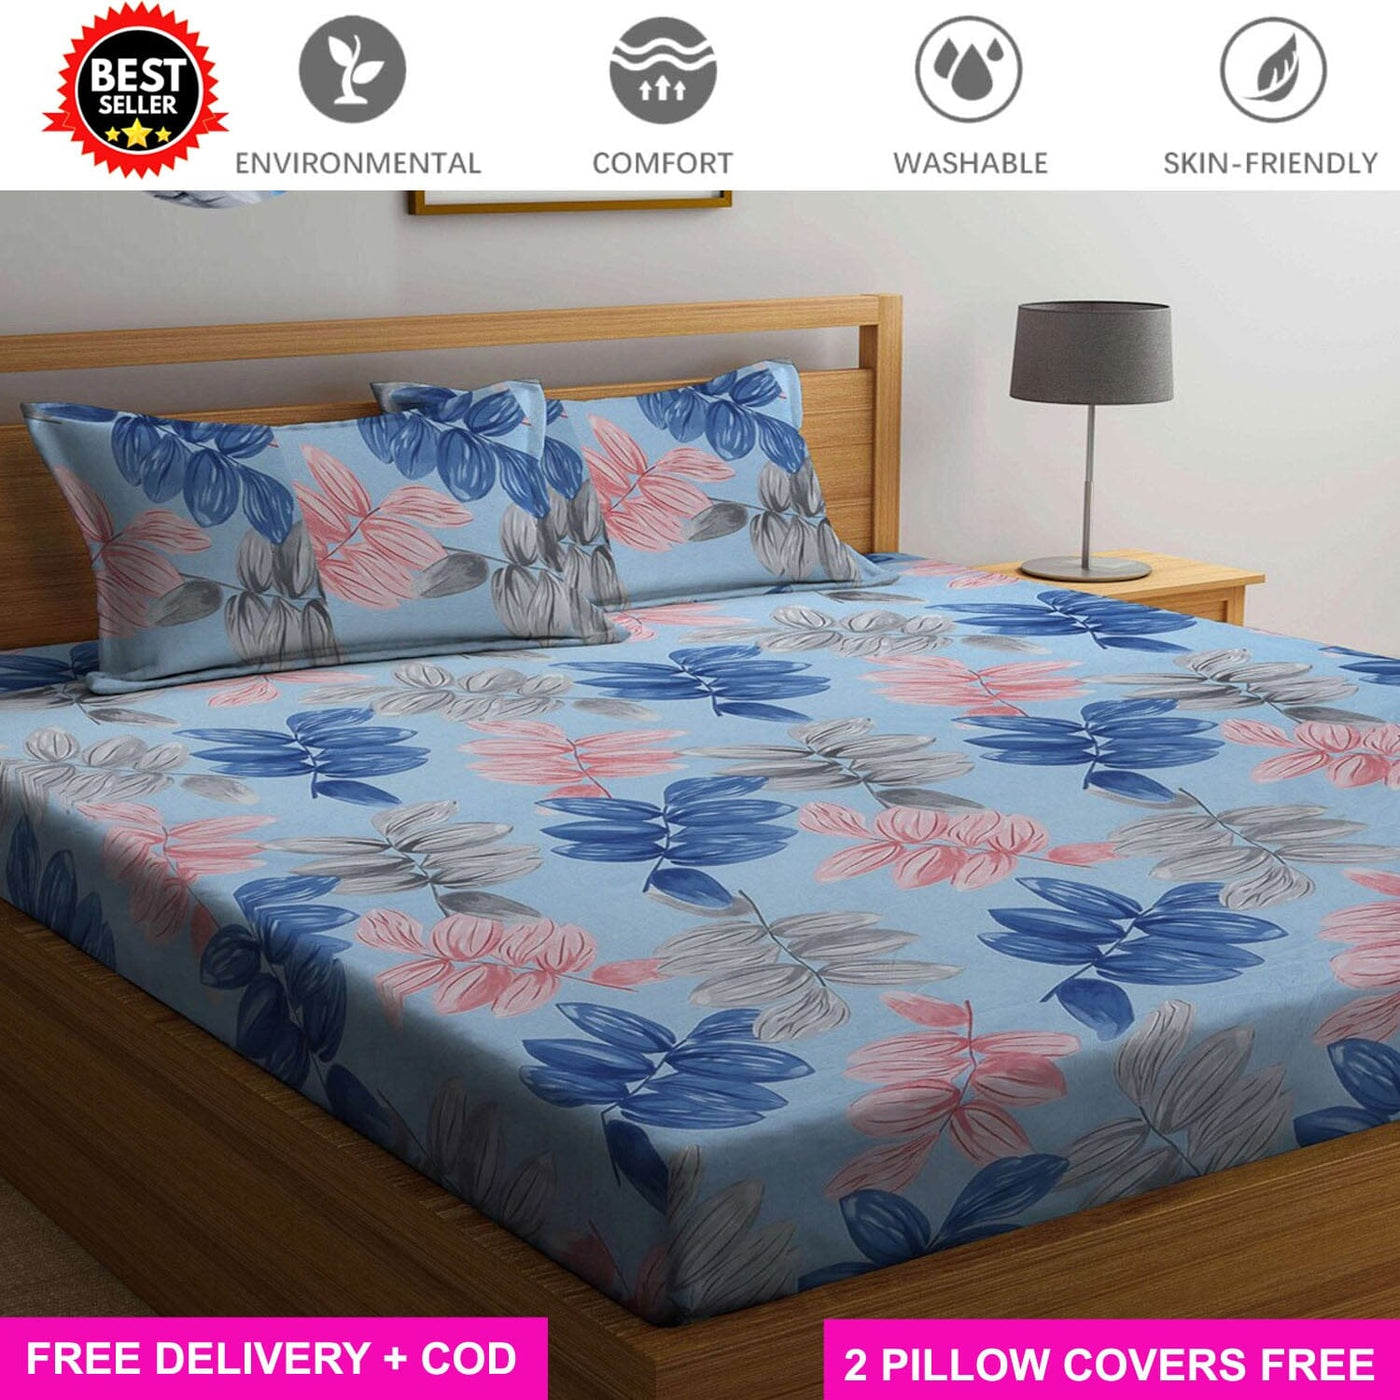 Cotton Elastic Fitted Bedsheet with 2 Pillow Covers - Fits with any Beds & Mattresses Great Happy IN Blue Pink Leaf KING SIZE 